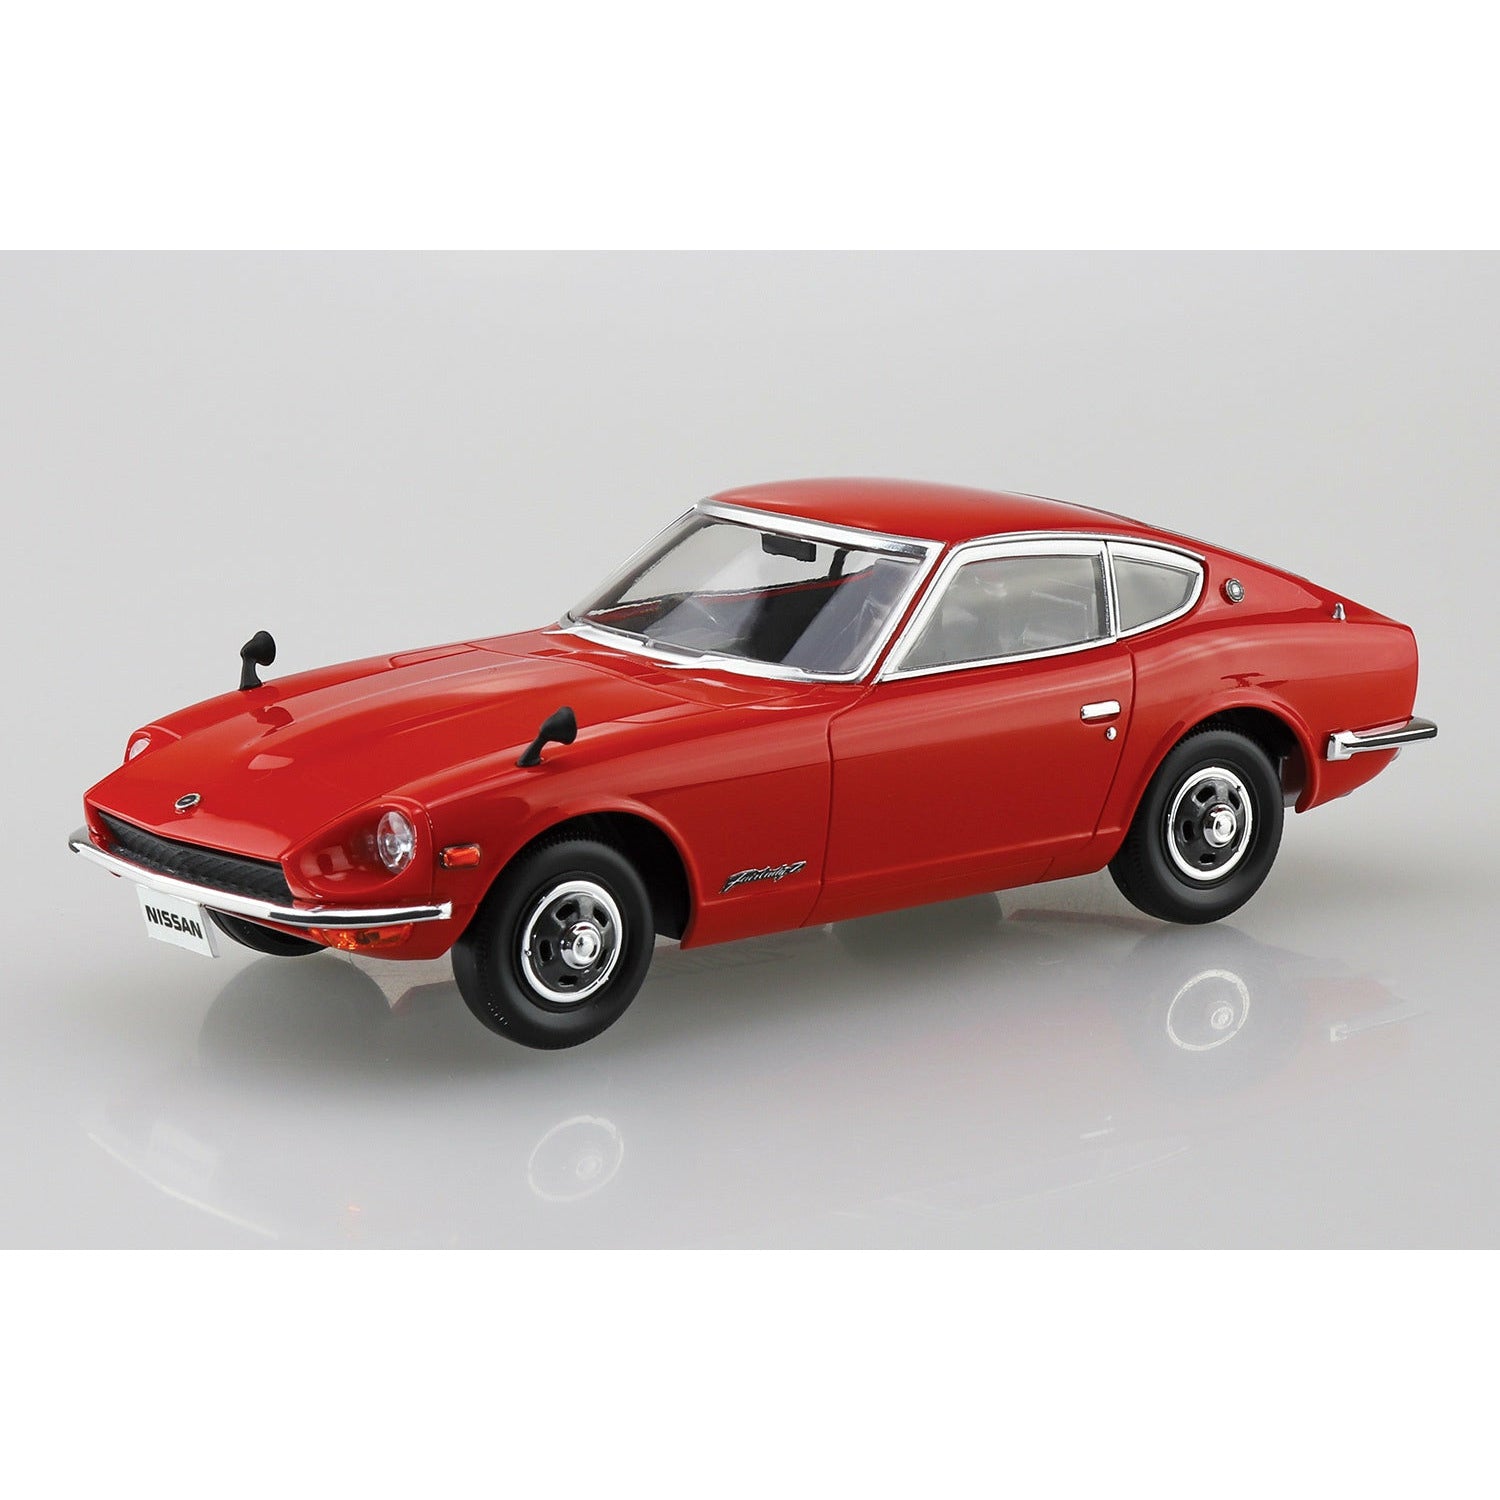 Nissan S30 Fairlady Z (Red) 1/32 #6256 by Aoshima